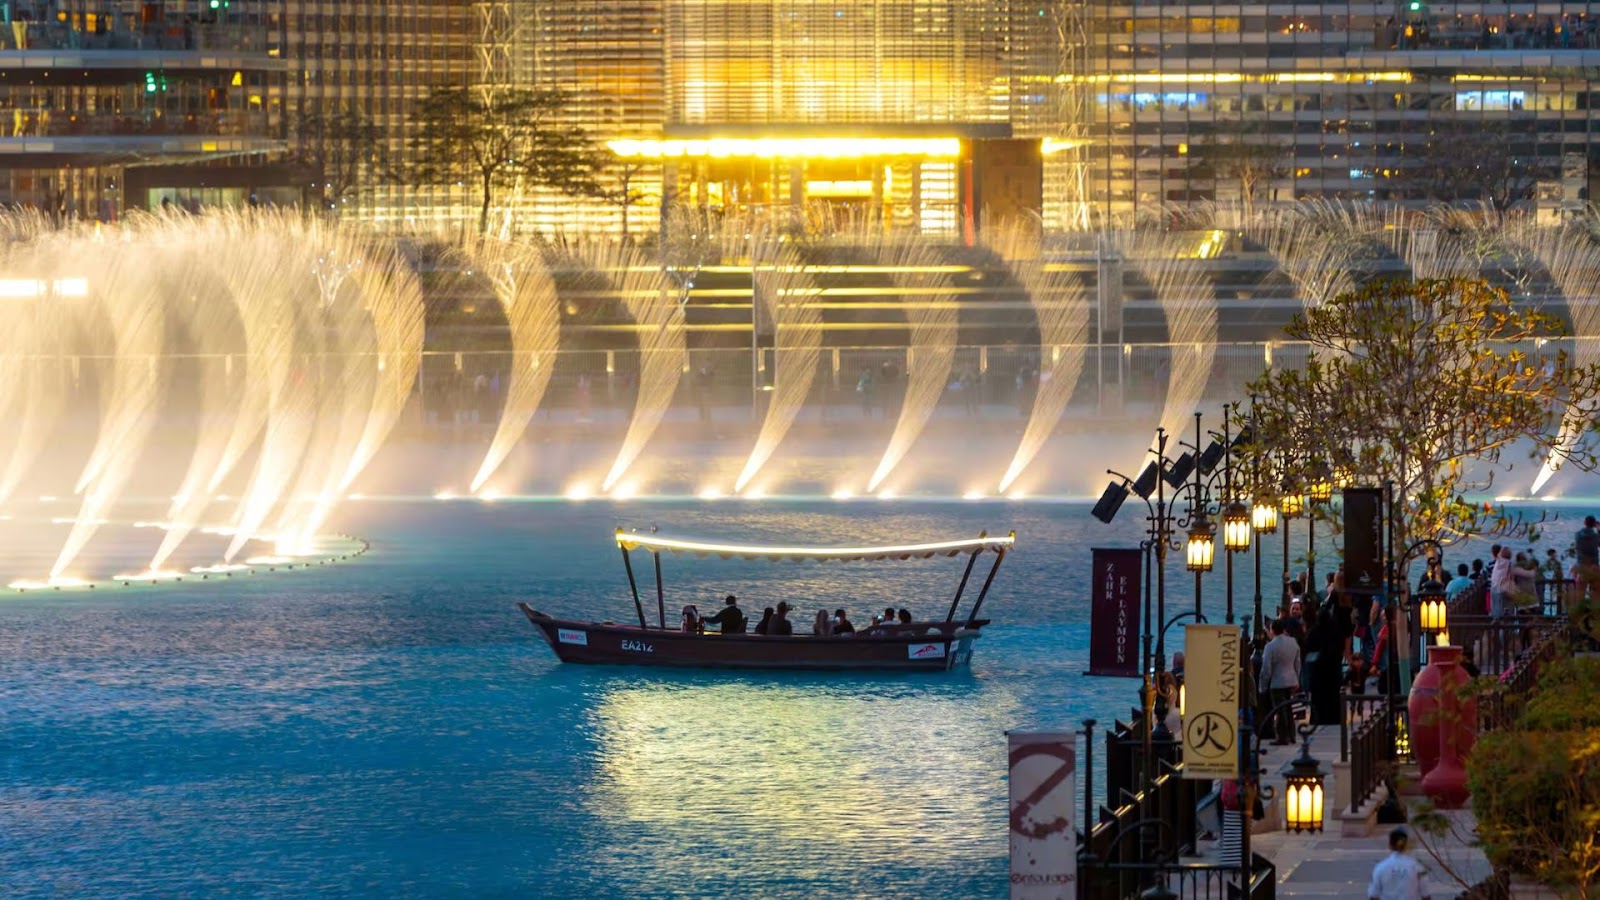 The Dubai Fountain: Famous buildings in Dubai and the best show of fountains.